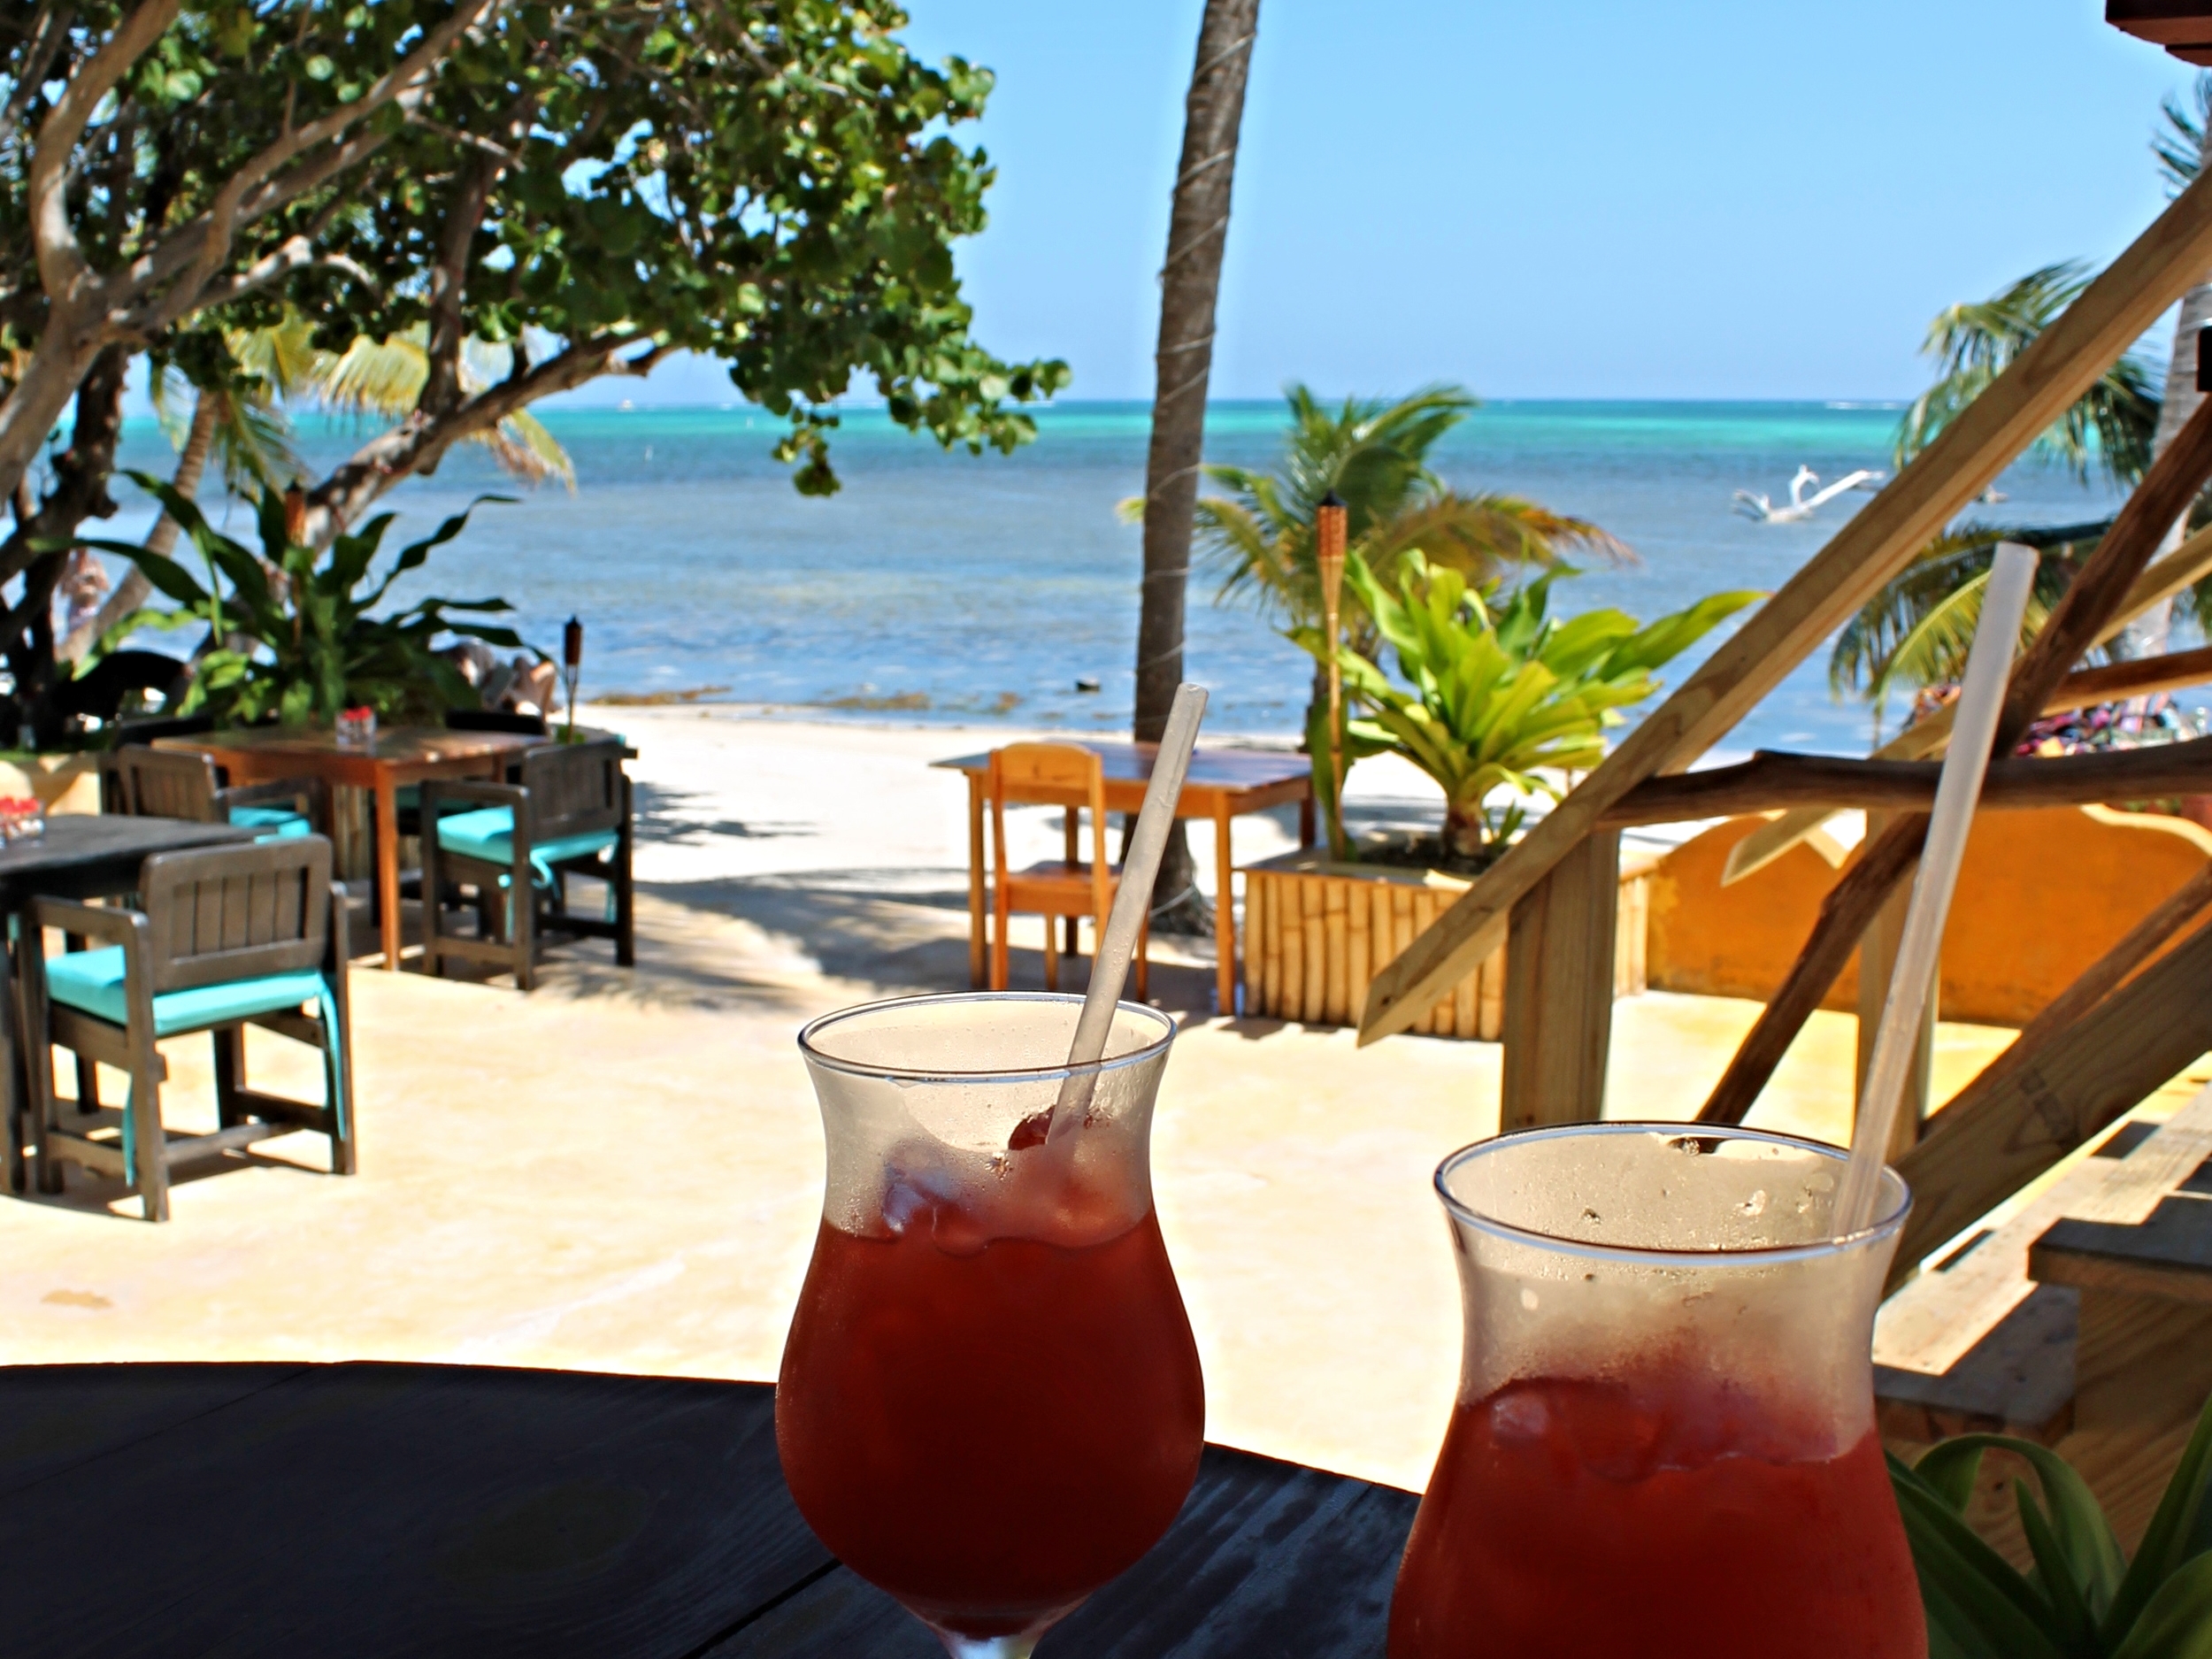 Tropical refreshments - with a view of the reef!